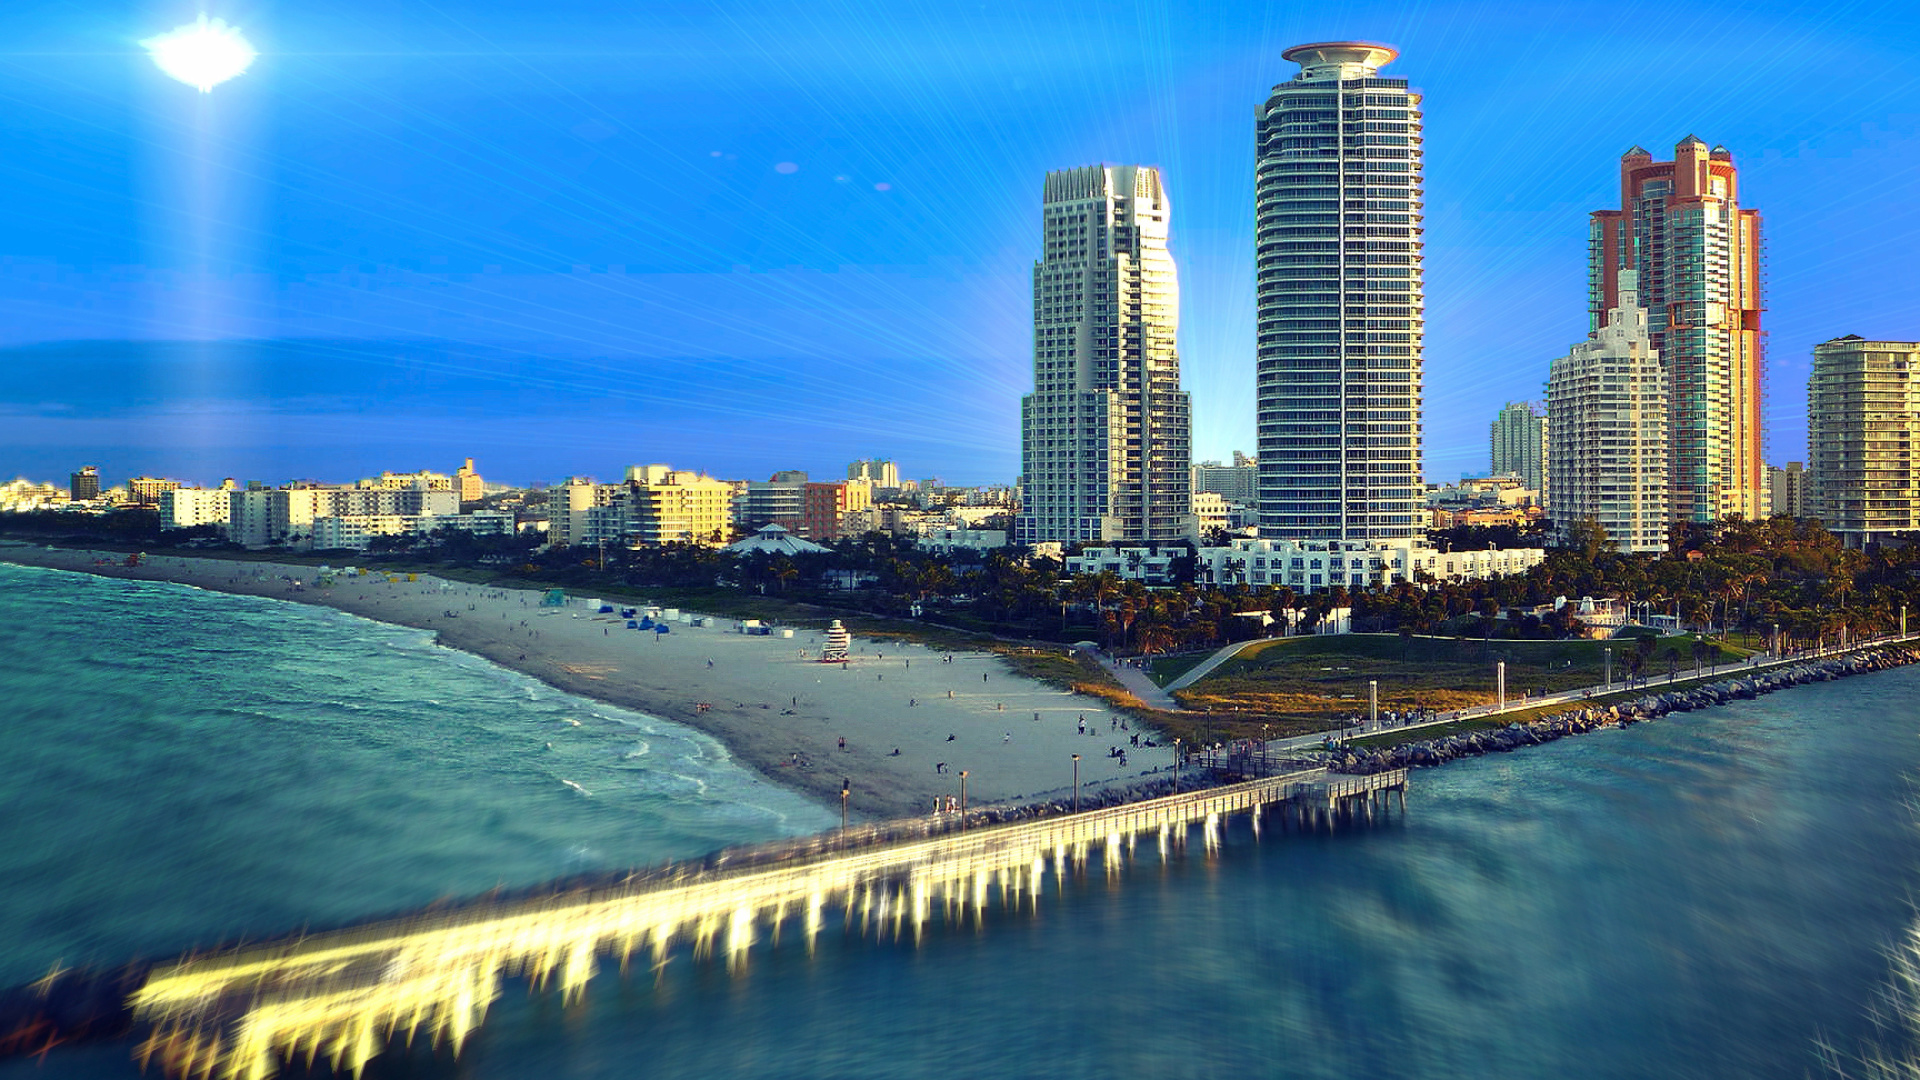 Miami Beach with Hotels wallpaper 1920x1080